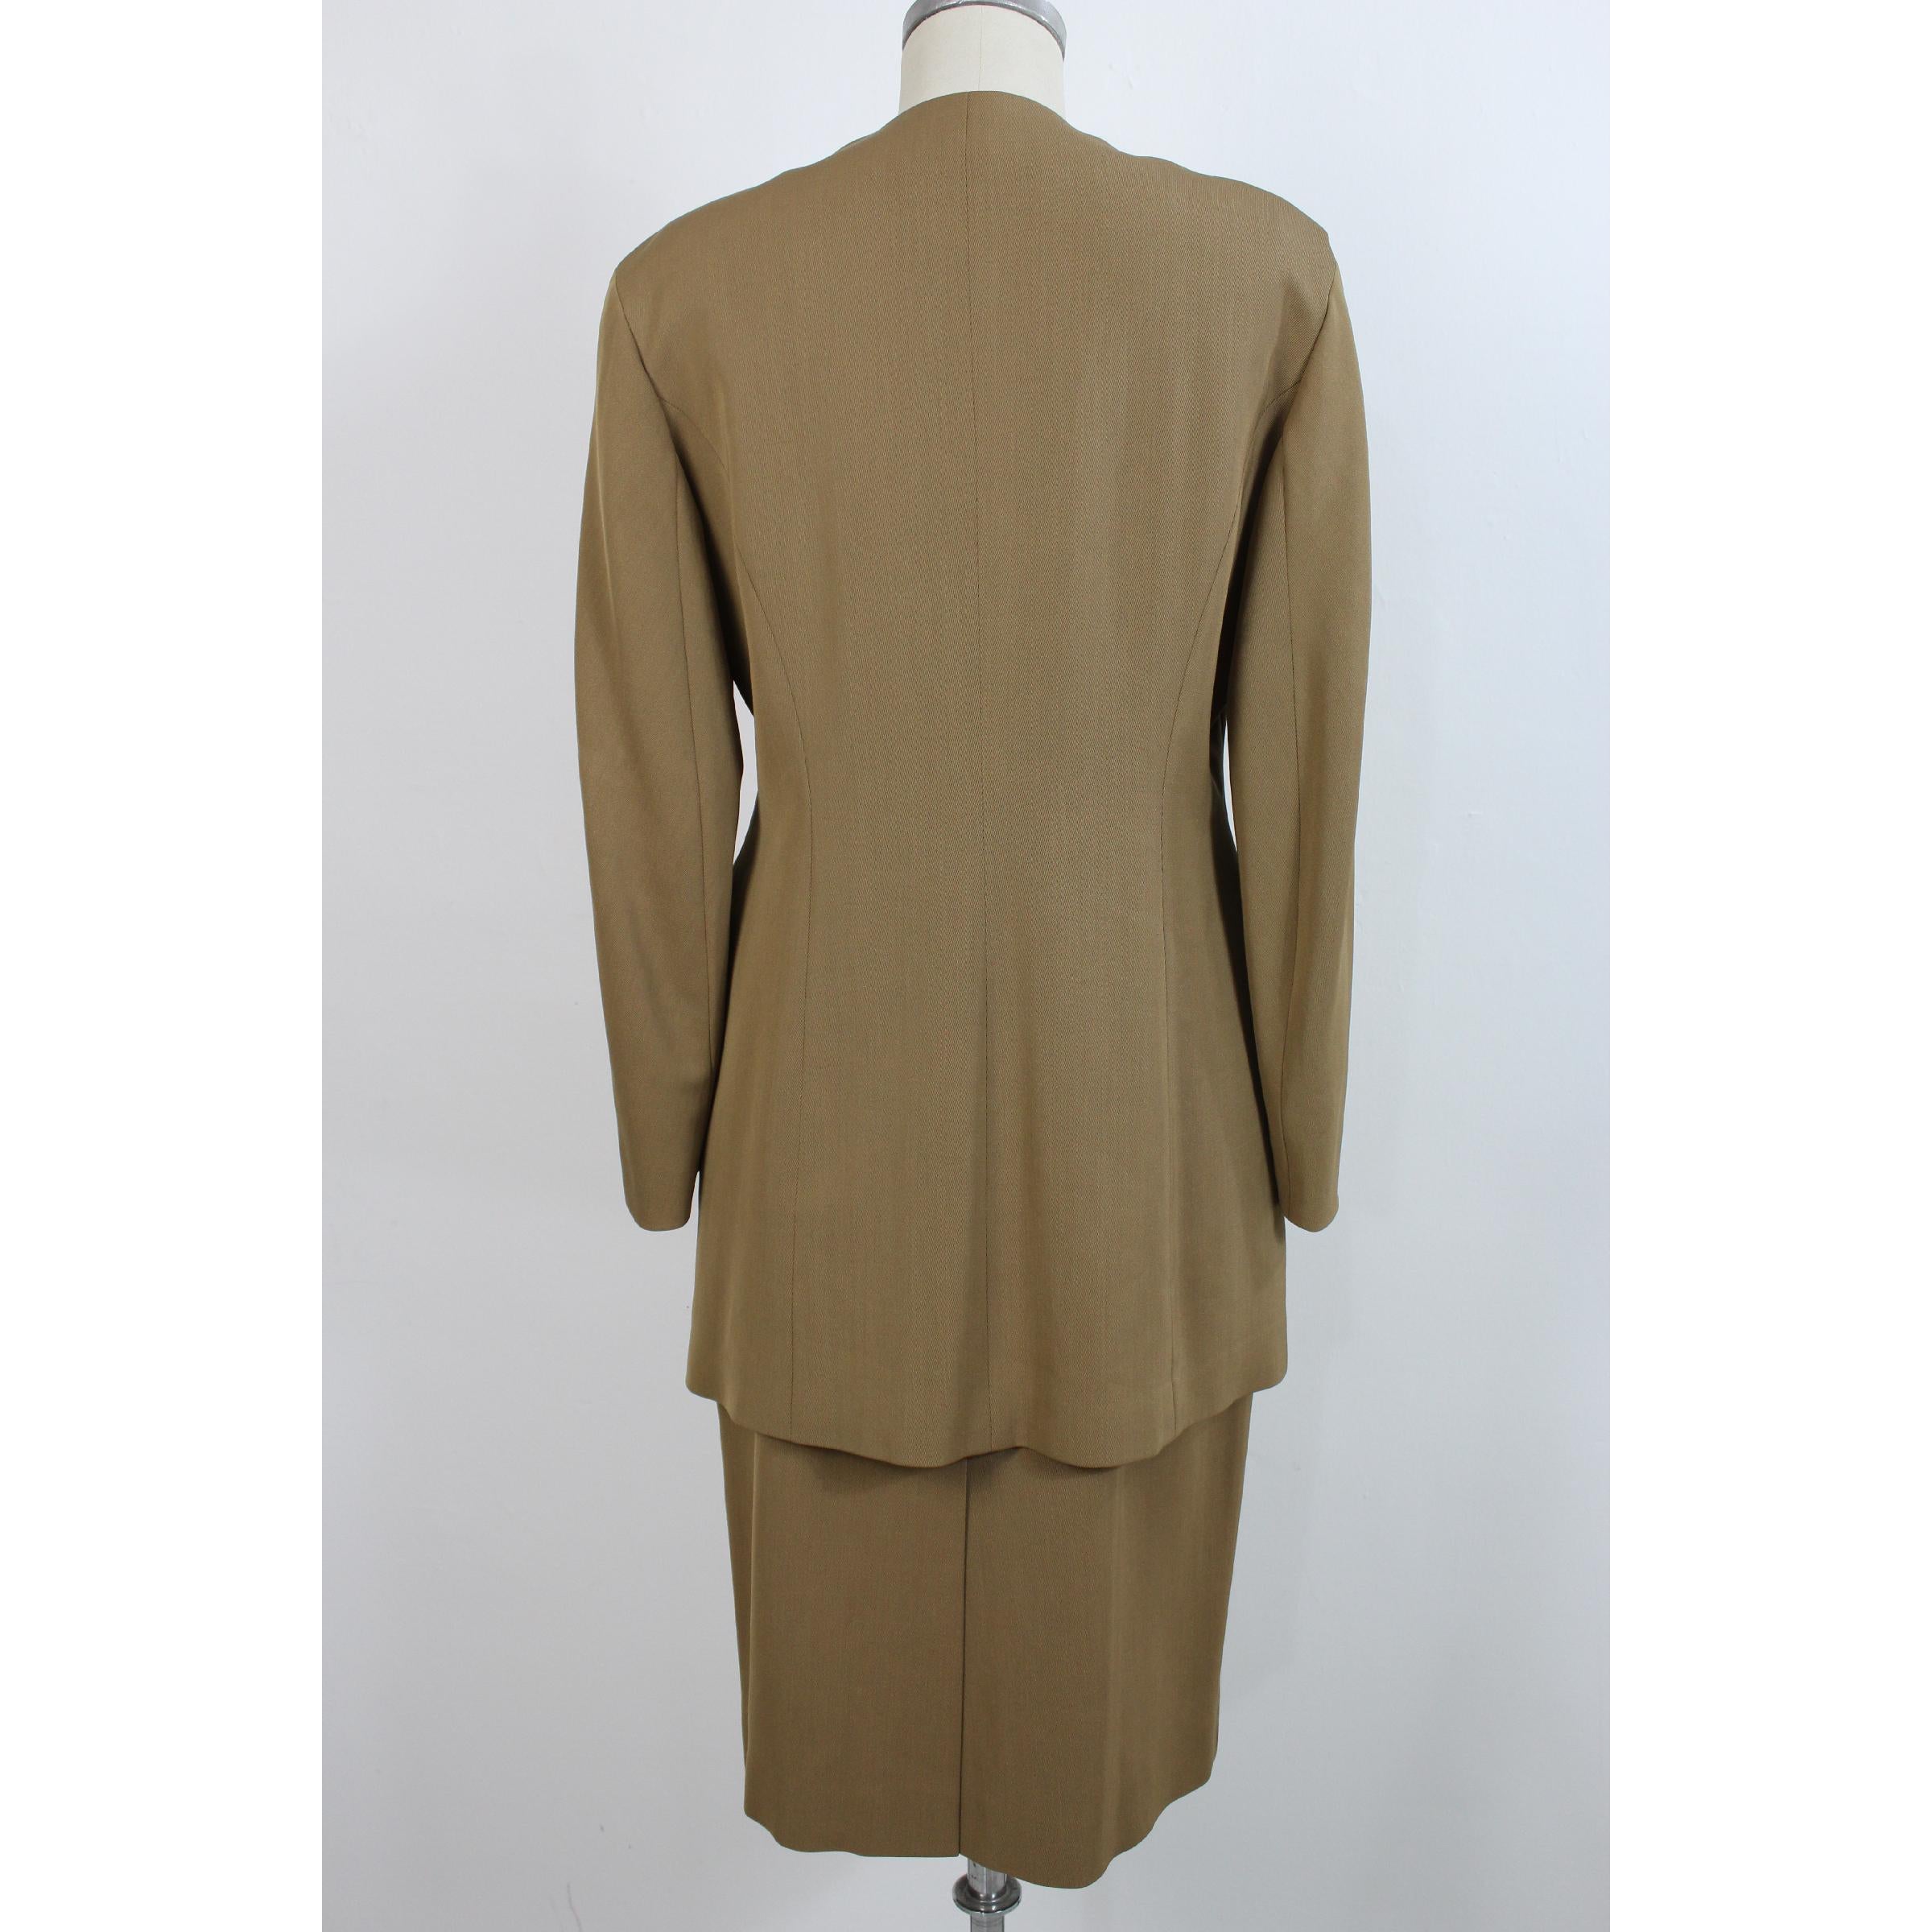 Jil Sander vintage woman suit, jacket and skirt beige, 70% wool 25% silk 5% cashmere. Concealed buttons. 90s. Made in Italy. Very good vintage condition, with some signs of use.

Size: 46 It 12 Us 14 Uk

Shoulder: 46 cm

Bust / Chest: 52 cm

Sleeve: